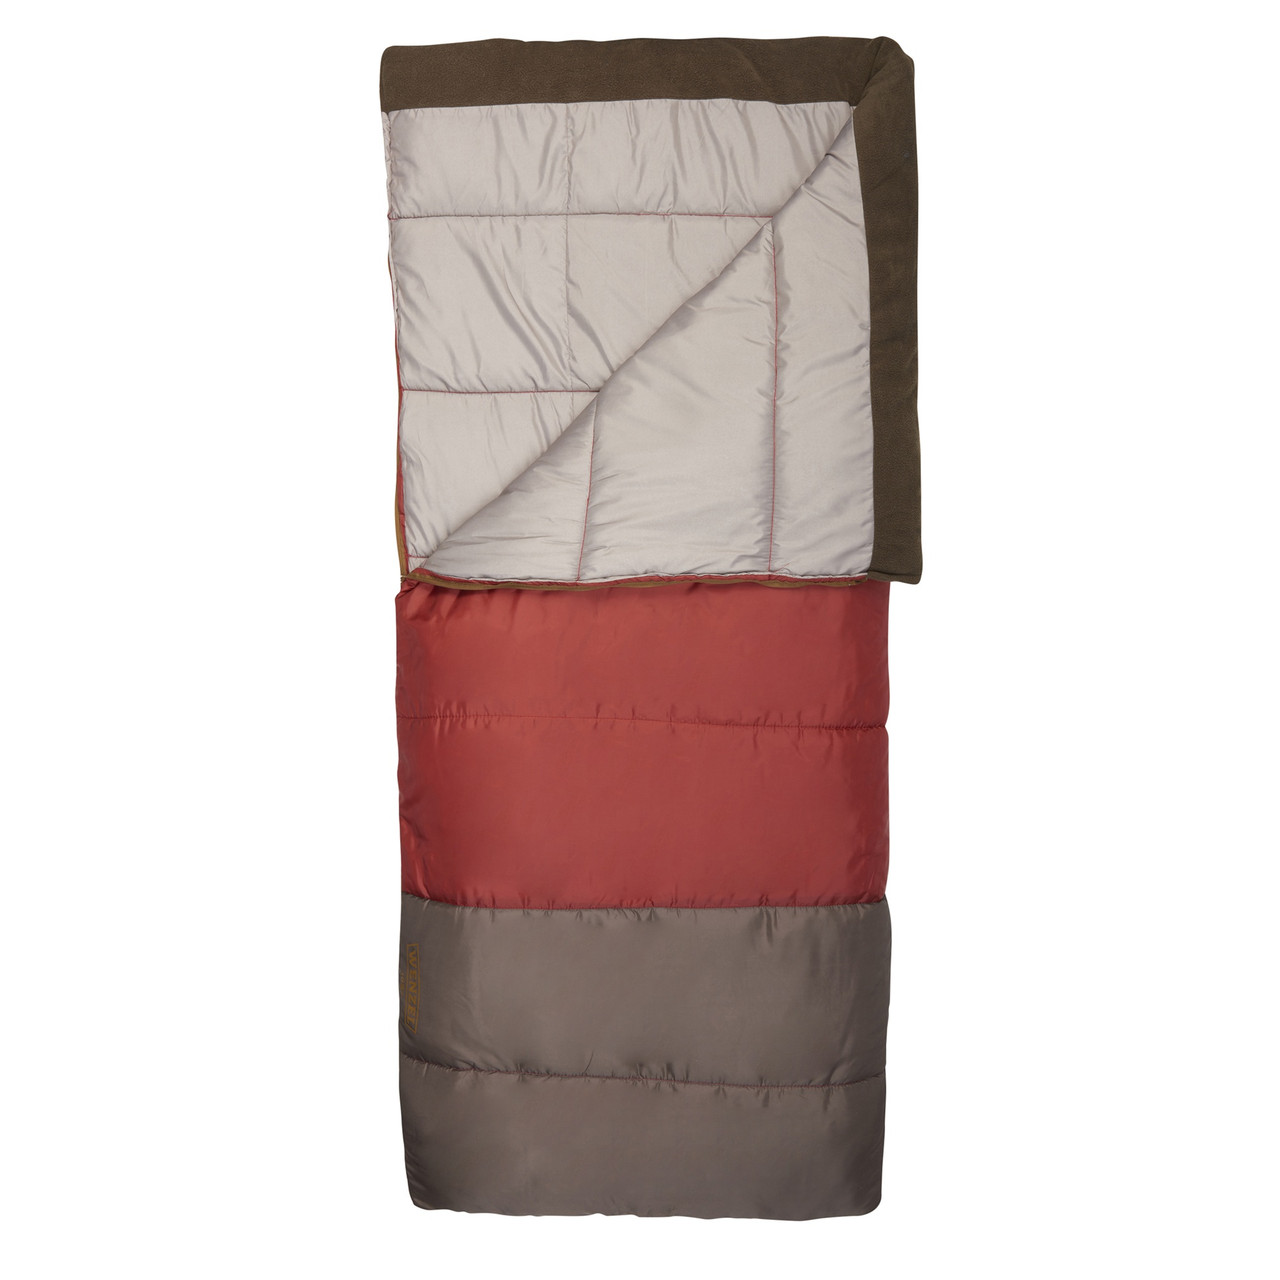 Wenzel Lodgepole Sleeping Bag, red, shown partially unzipped